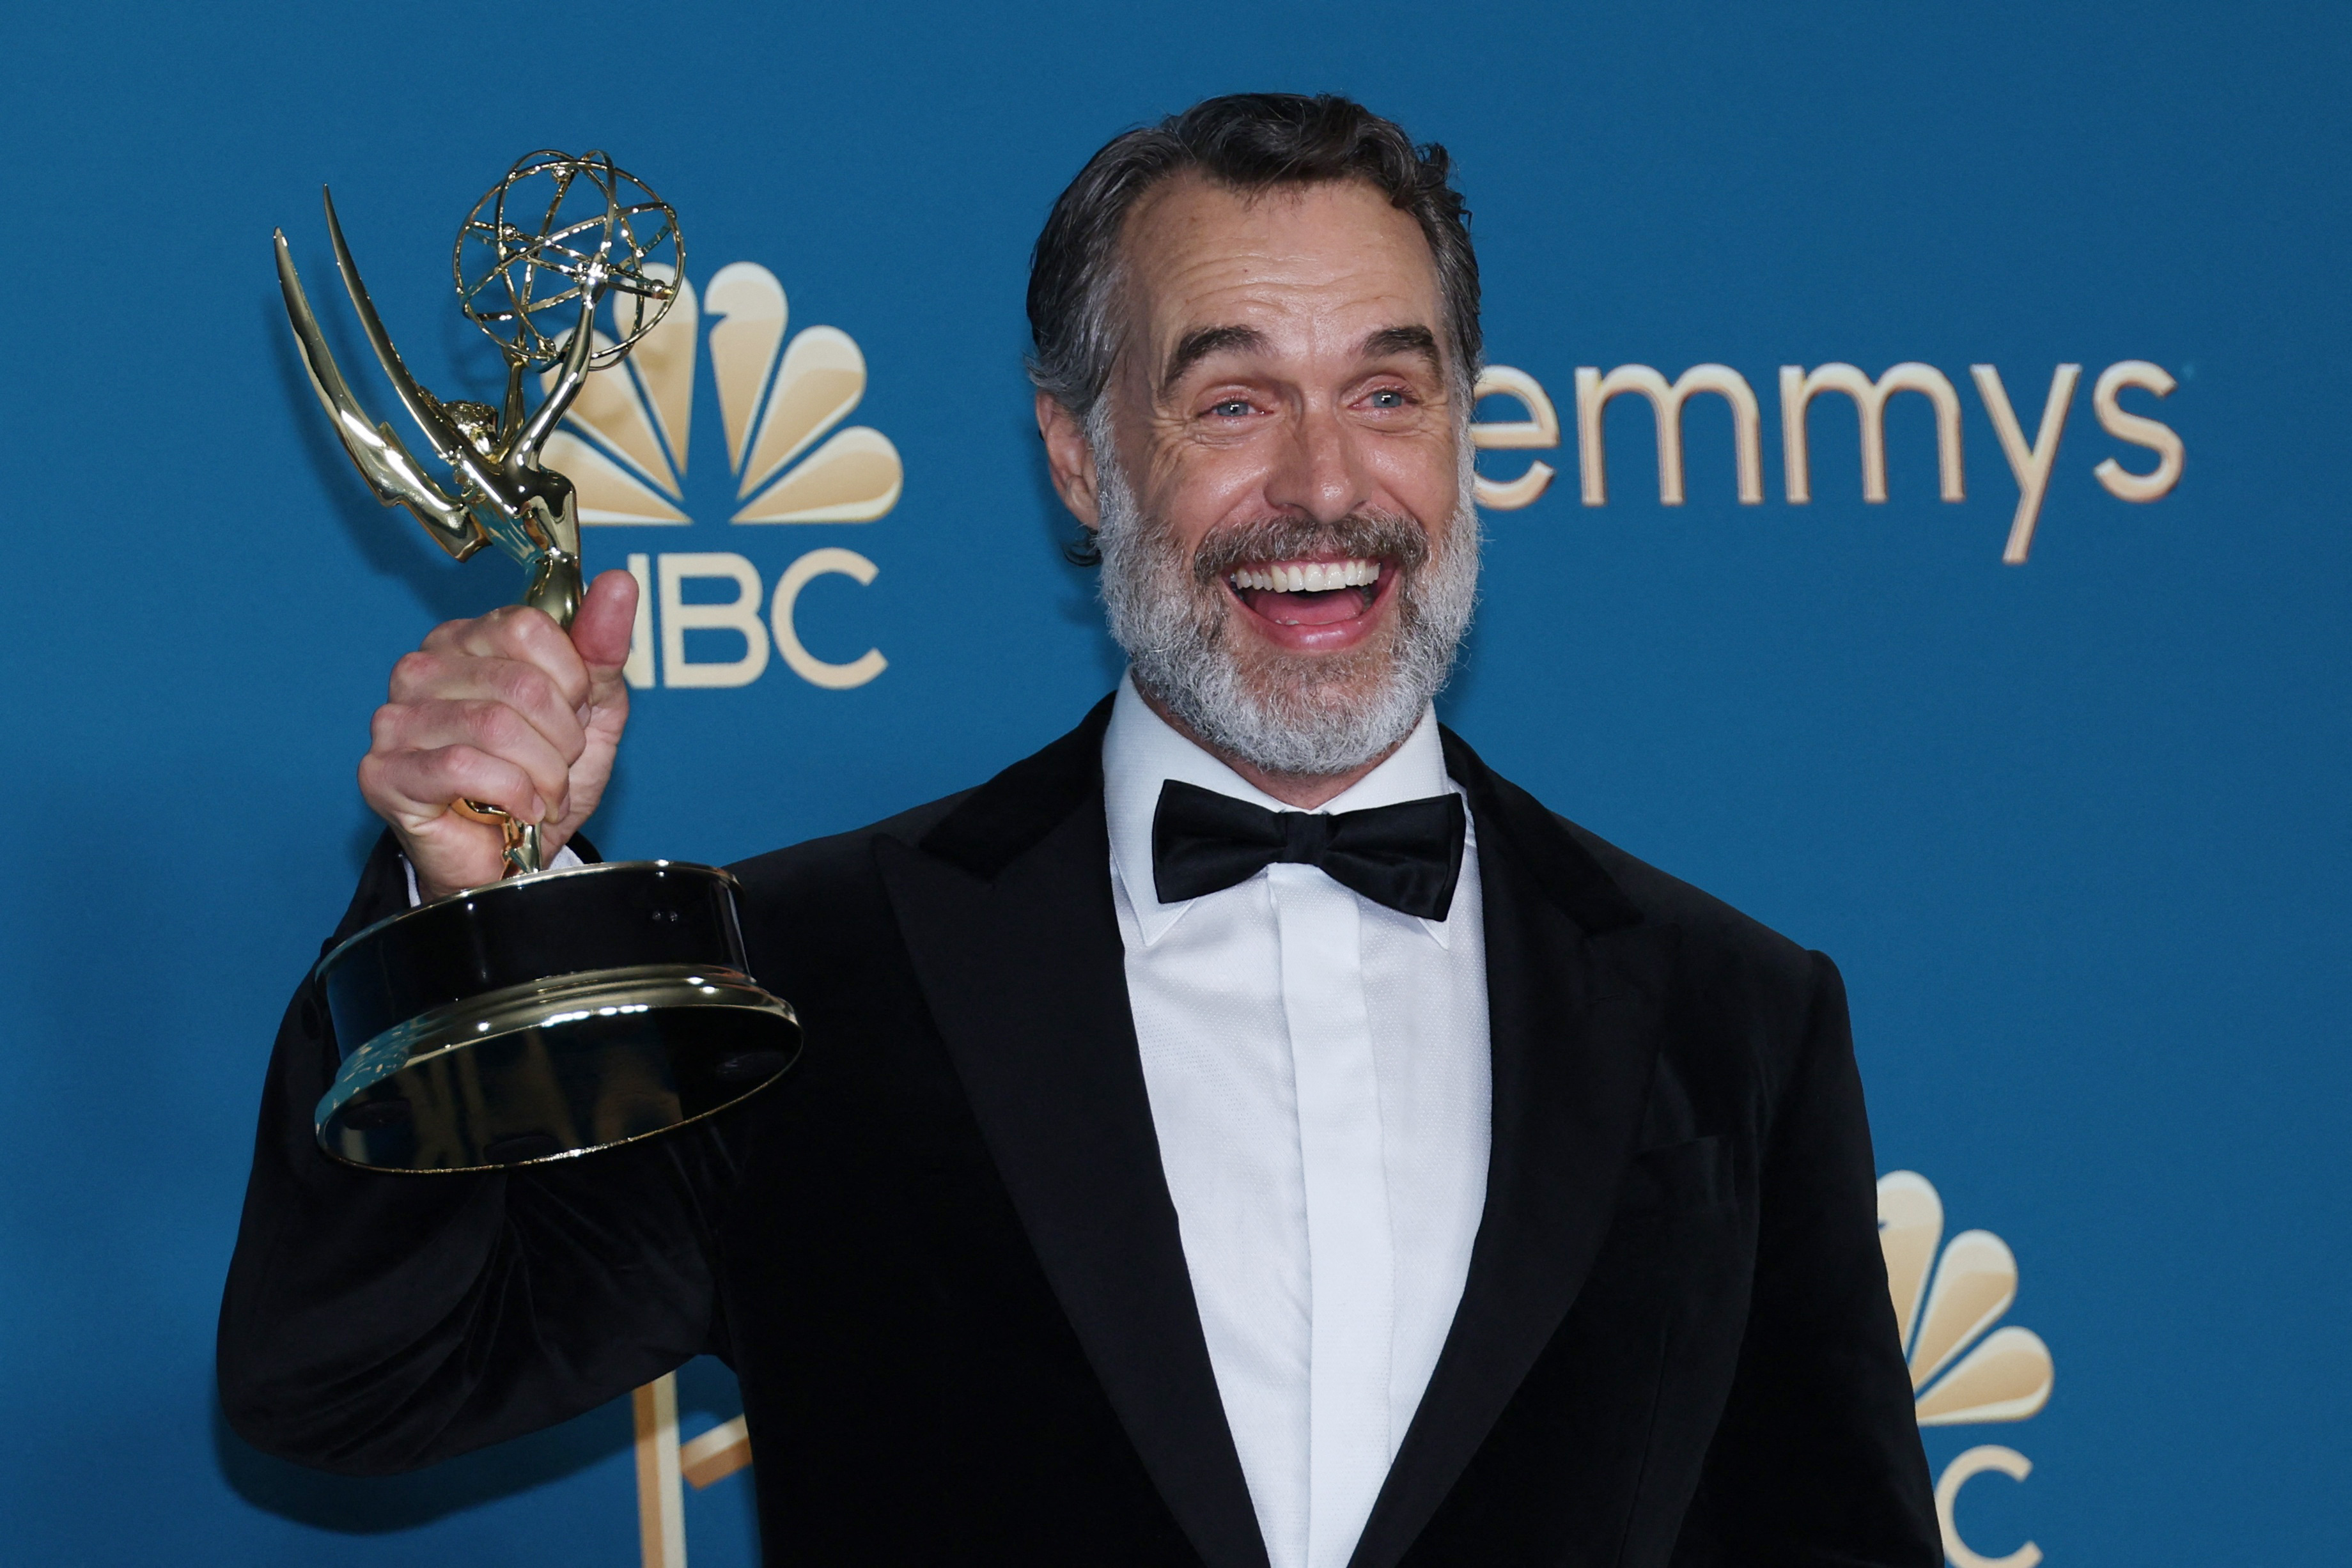 Murray Bartlett poses with his award for Outstanding Supporting Actor in a Limited or Anthology Series or Movie for "The White Lotus"  at the 74th Primetime Emmy Awards held at the Microsoft Theater in Los Angeles, U.S., September 12, 2022. REUTERS/Aude Guerrucci